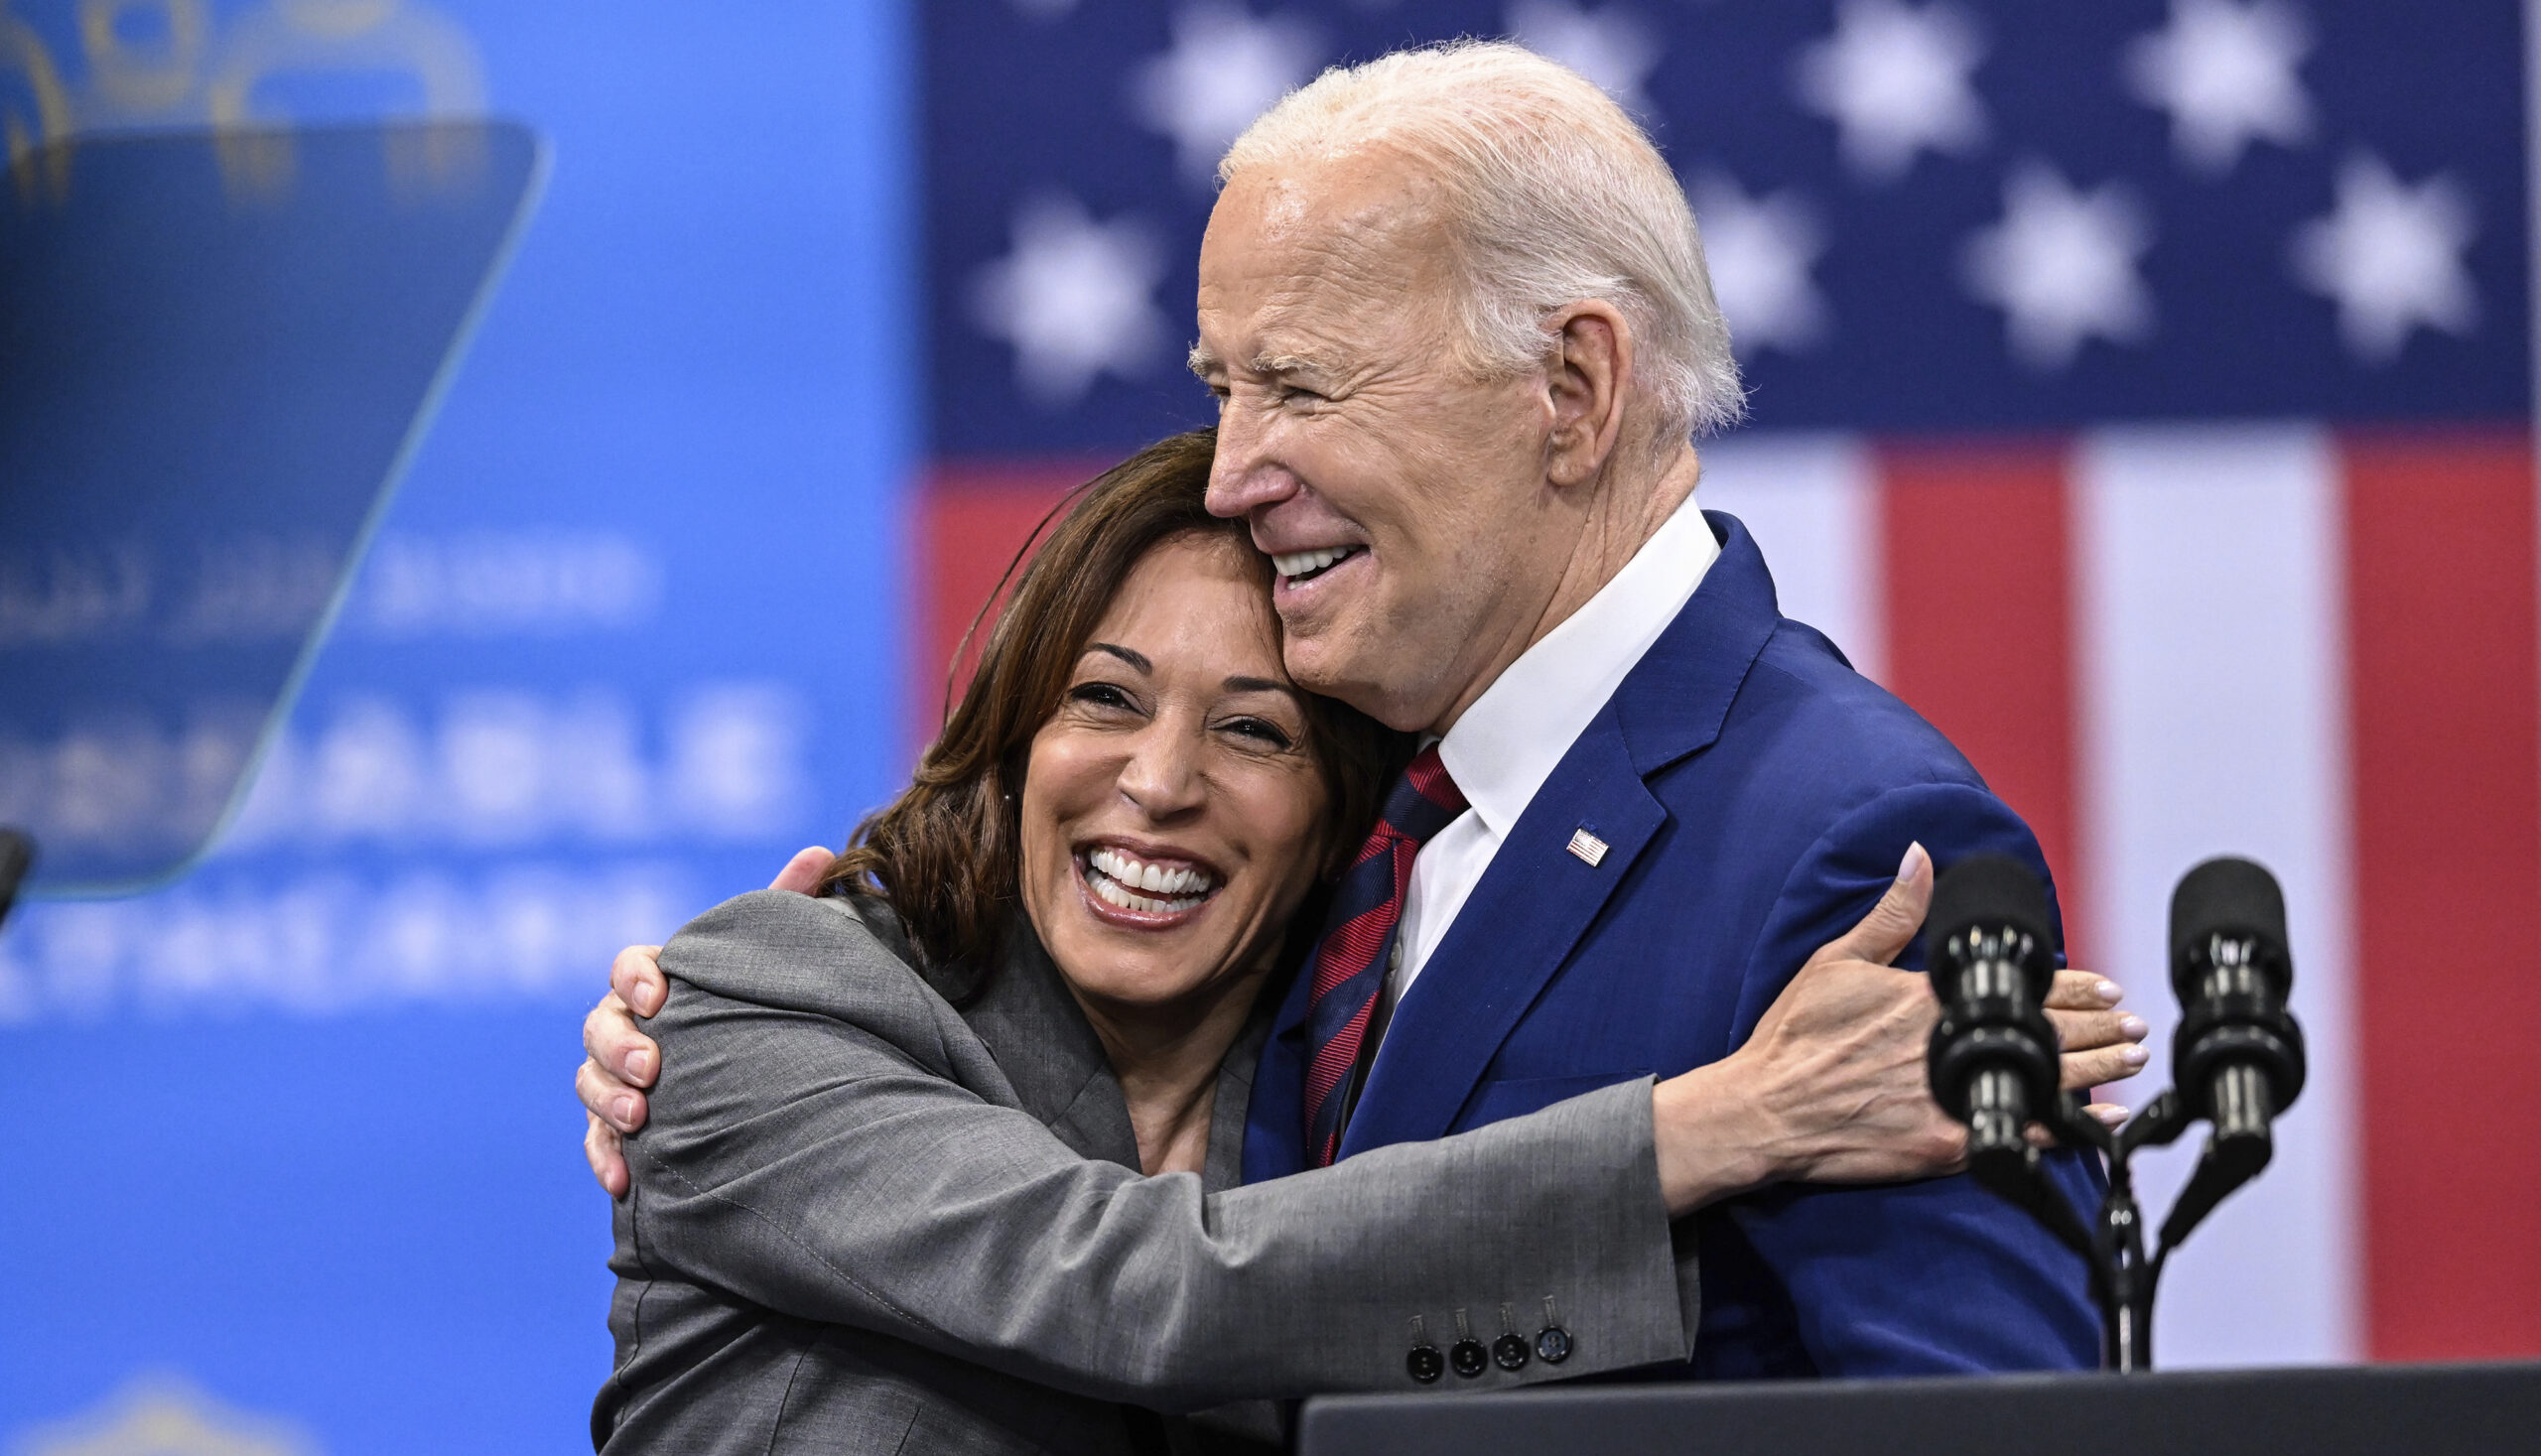 Wisconsin political scientists react to Biden’s withdrawal from presidential race